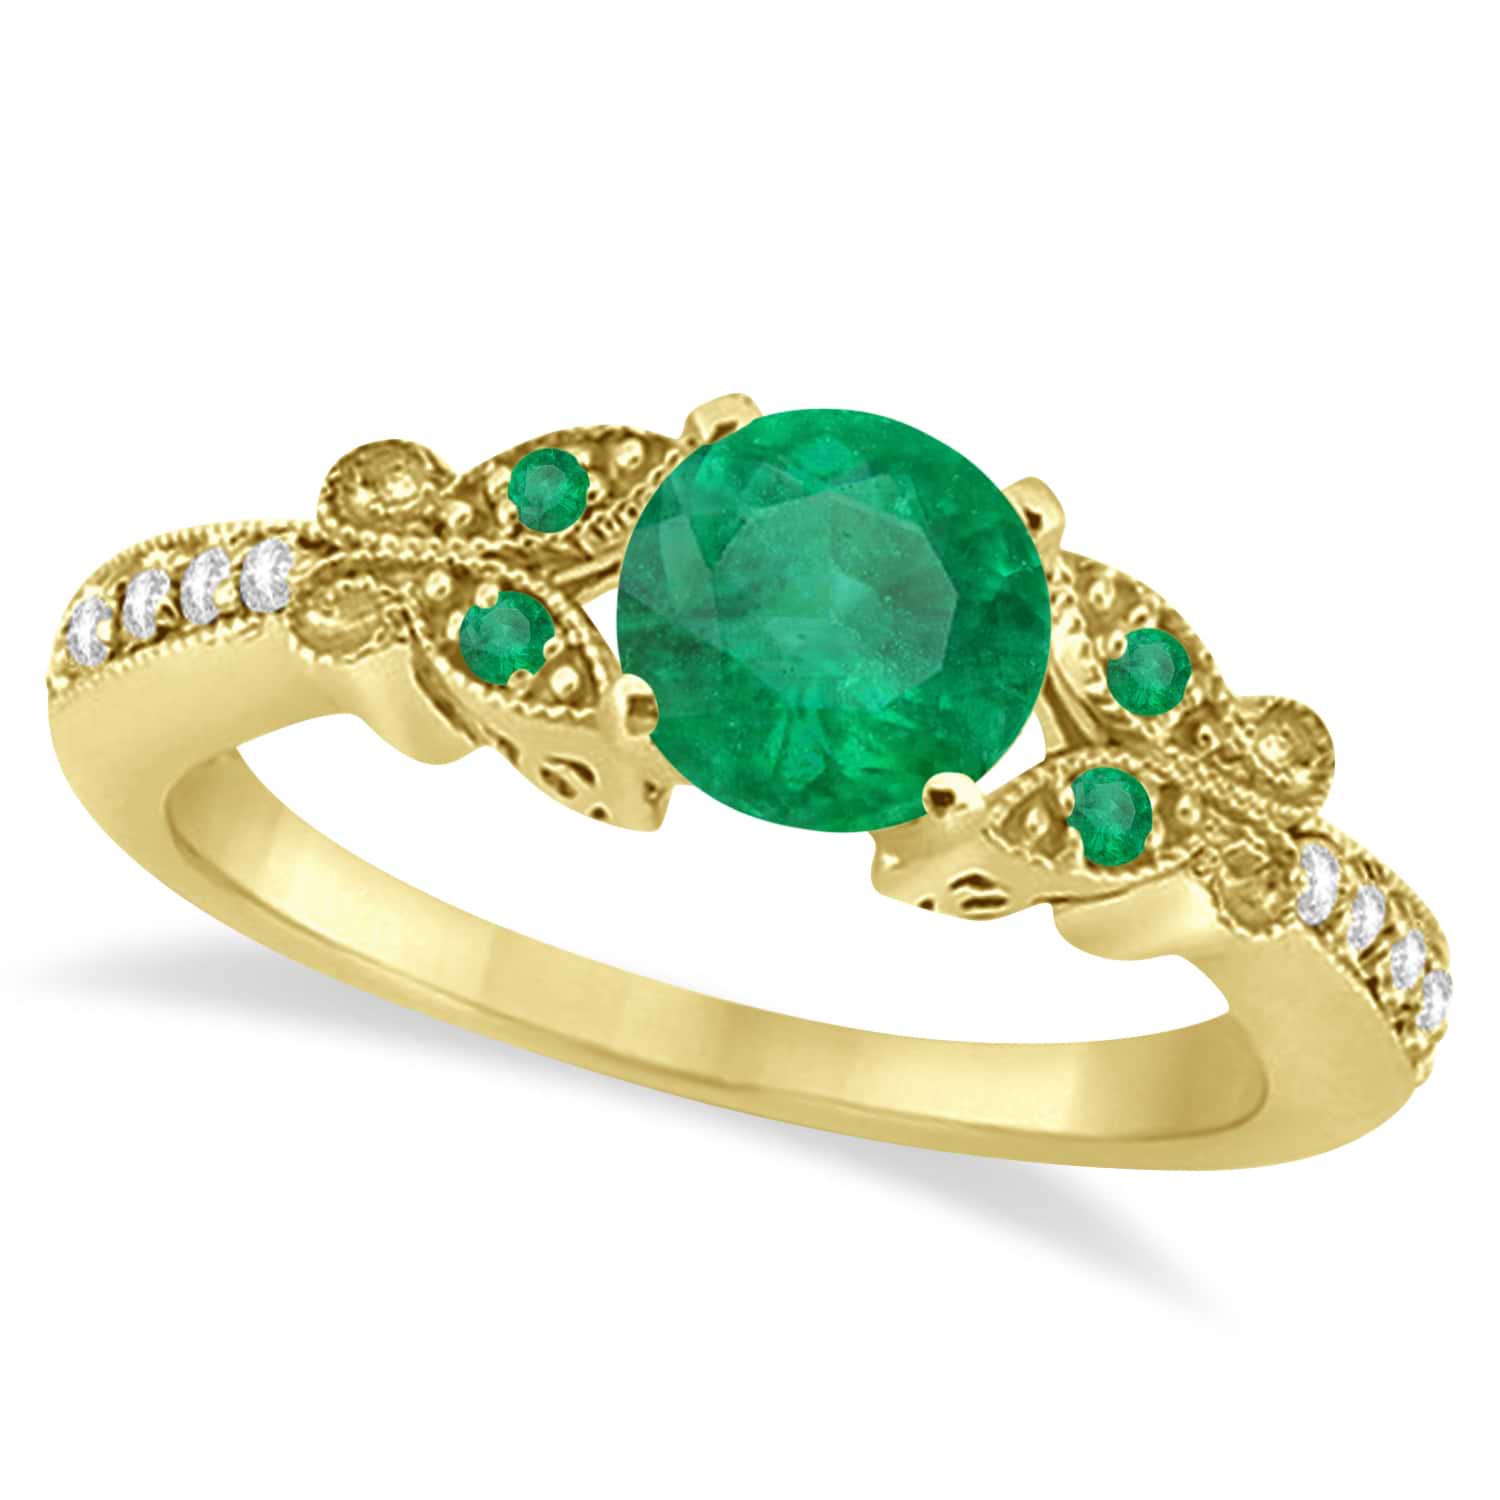 Butterfly Genuine Emerald & Diamond Engagement Ring 14k Yellow Gold (1.91ct)